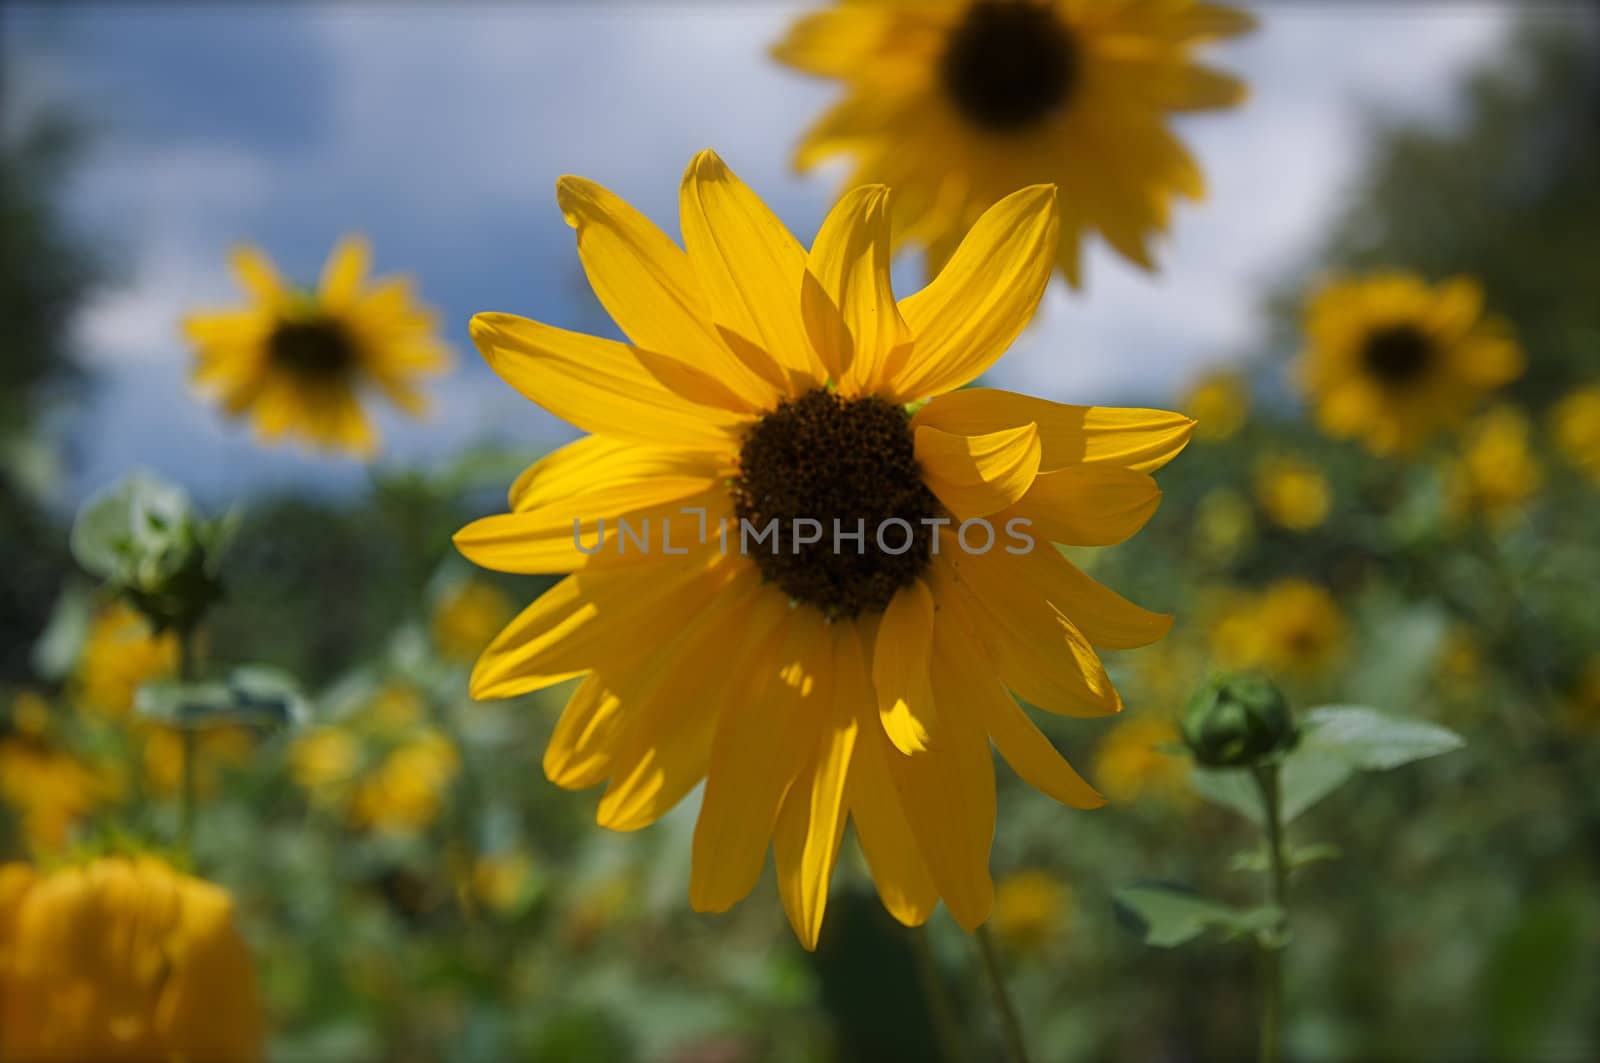 A field is loaded with summer sunflowers in Colorado.